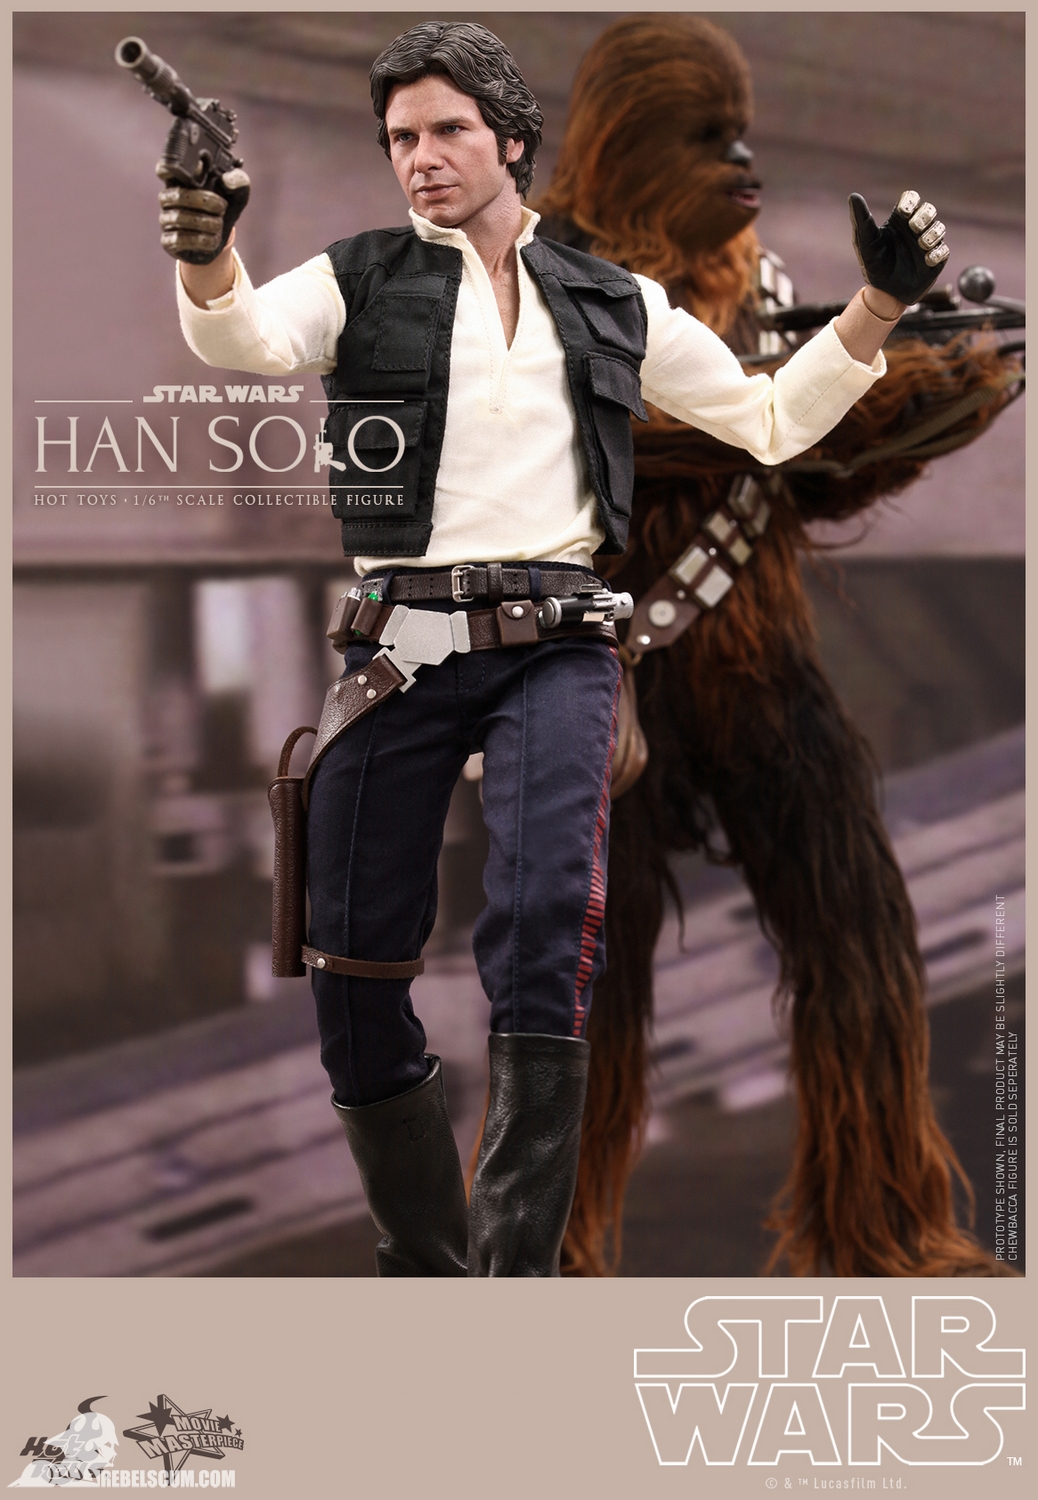 Hot-Toys-A-New-Hope-Han-solo-Movie-Masterpiece-Series-008.jpg